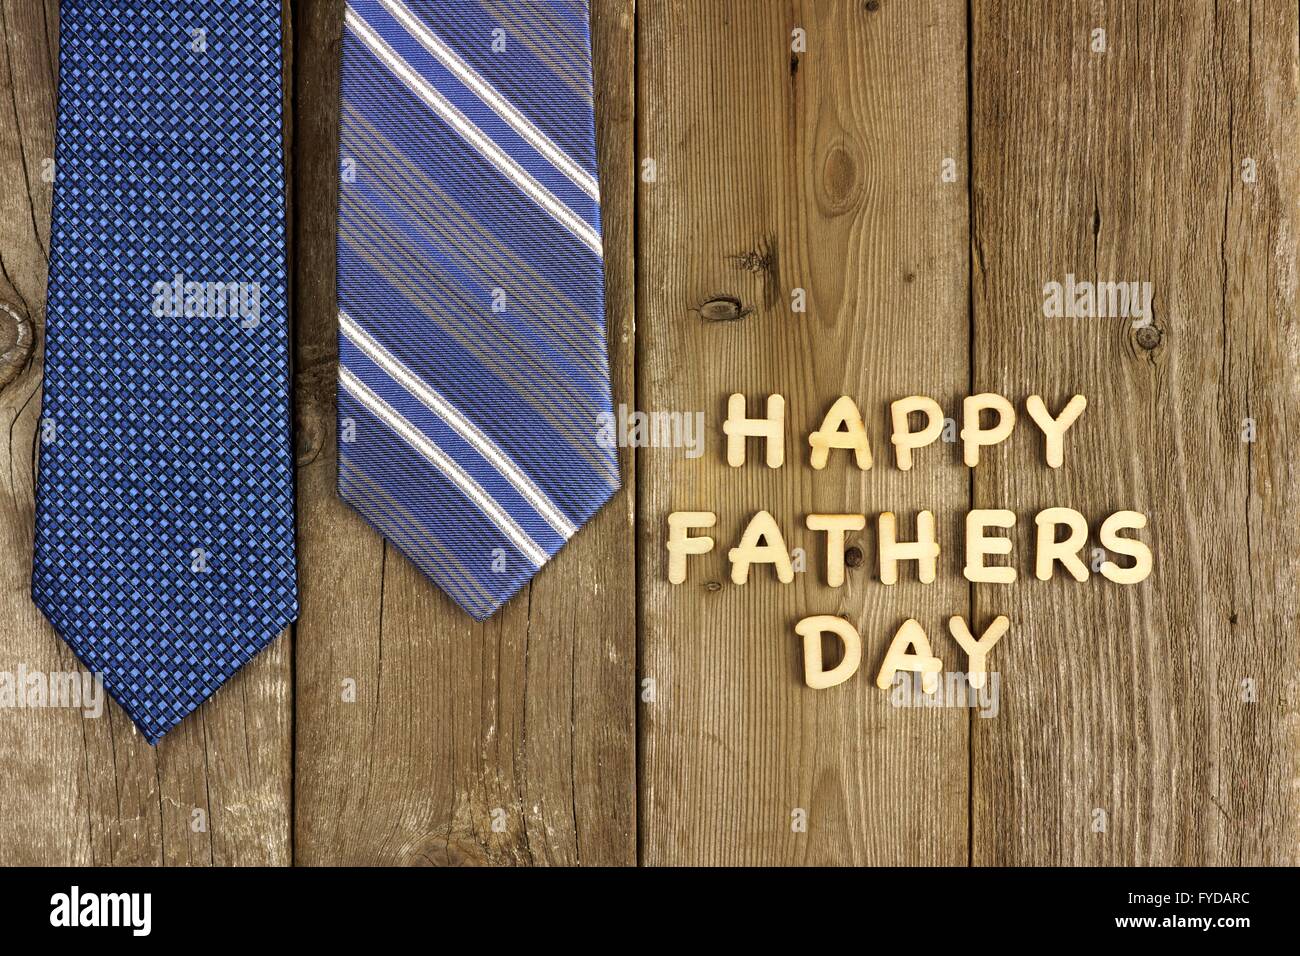 Happy Fathers Day wooden letters on a rustic wooden background with blue ties Stock Photo